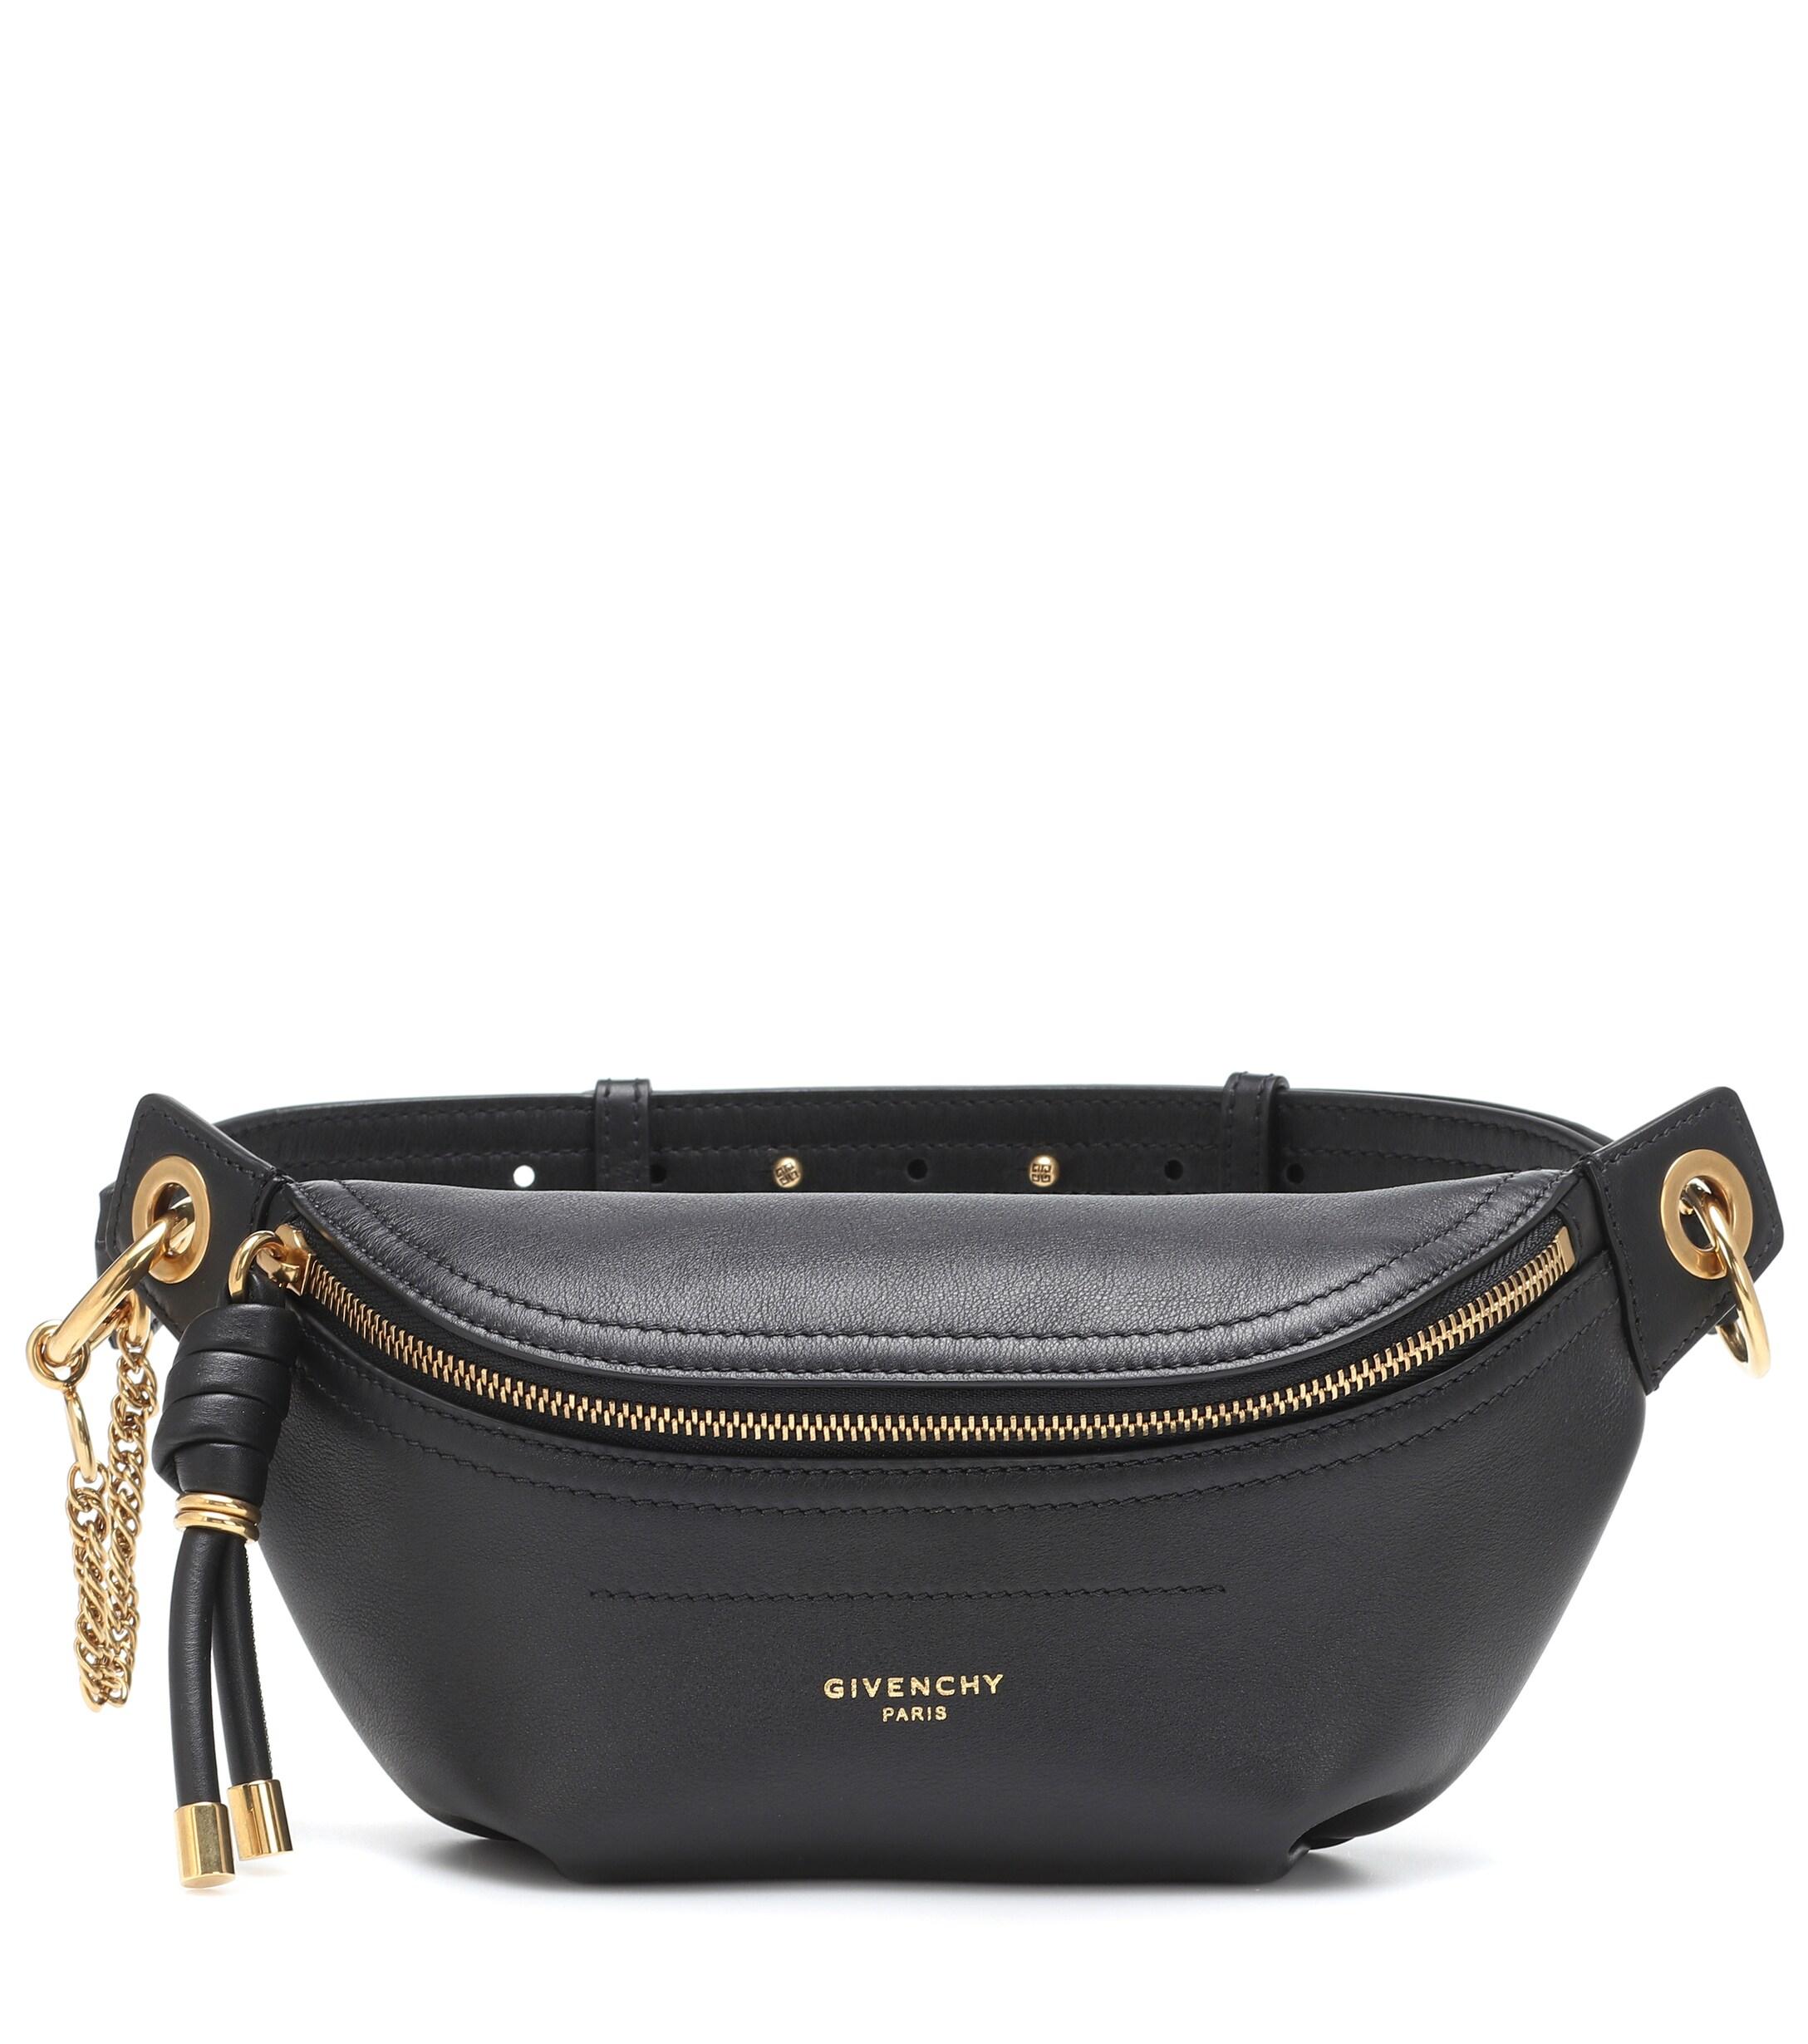 Givenchy Whip Small Leather Belt Bag in Black - Lyst